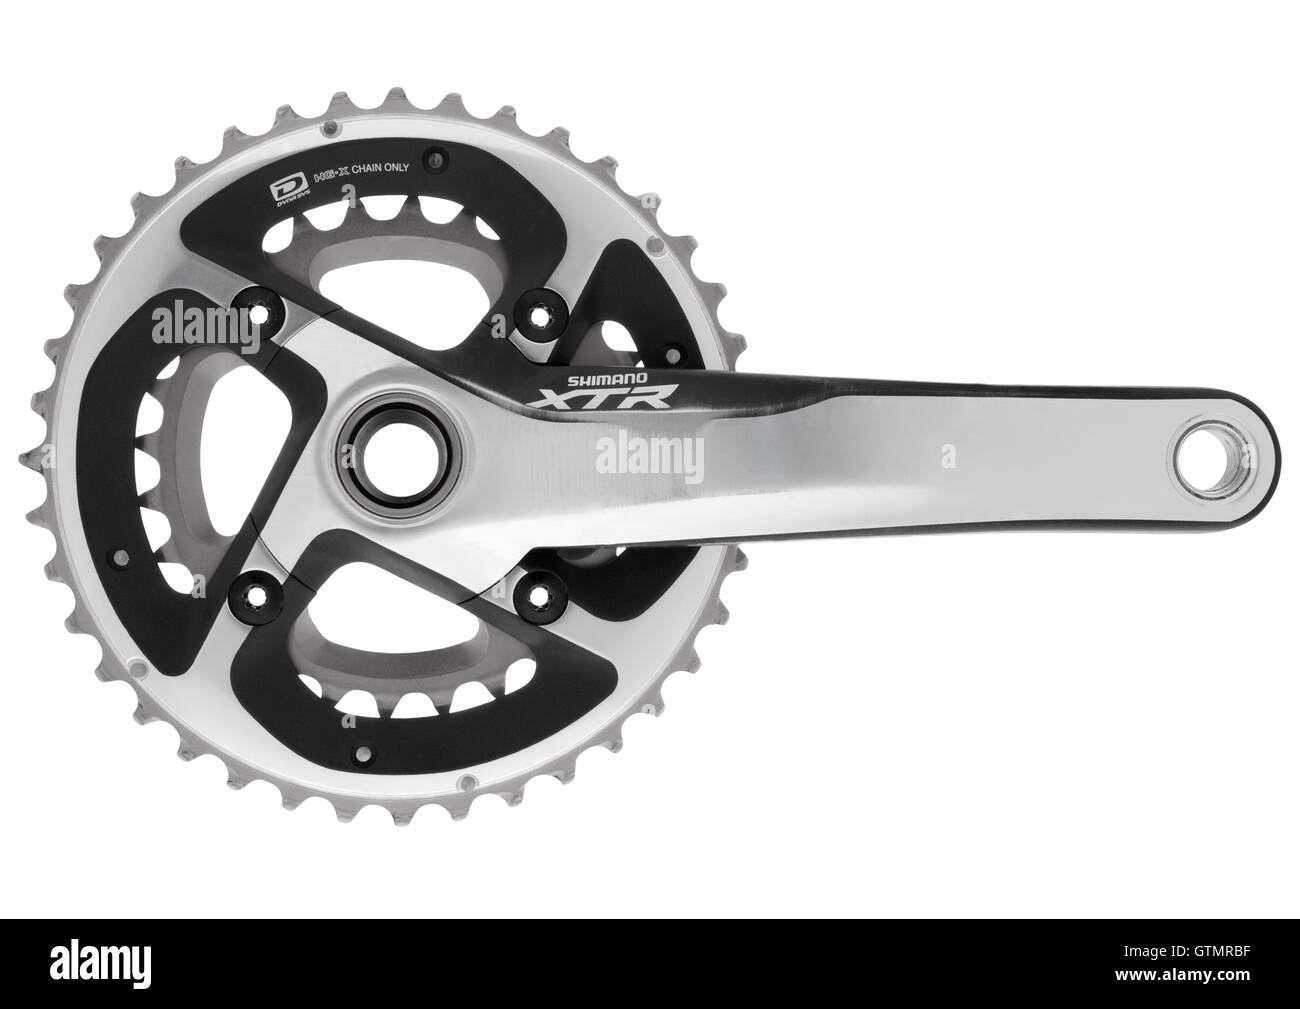 Shimano XTR FC-M985 10 speed double chainset on white background Stock Photo